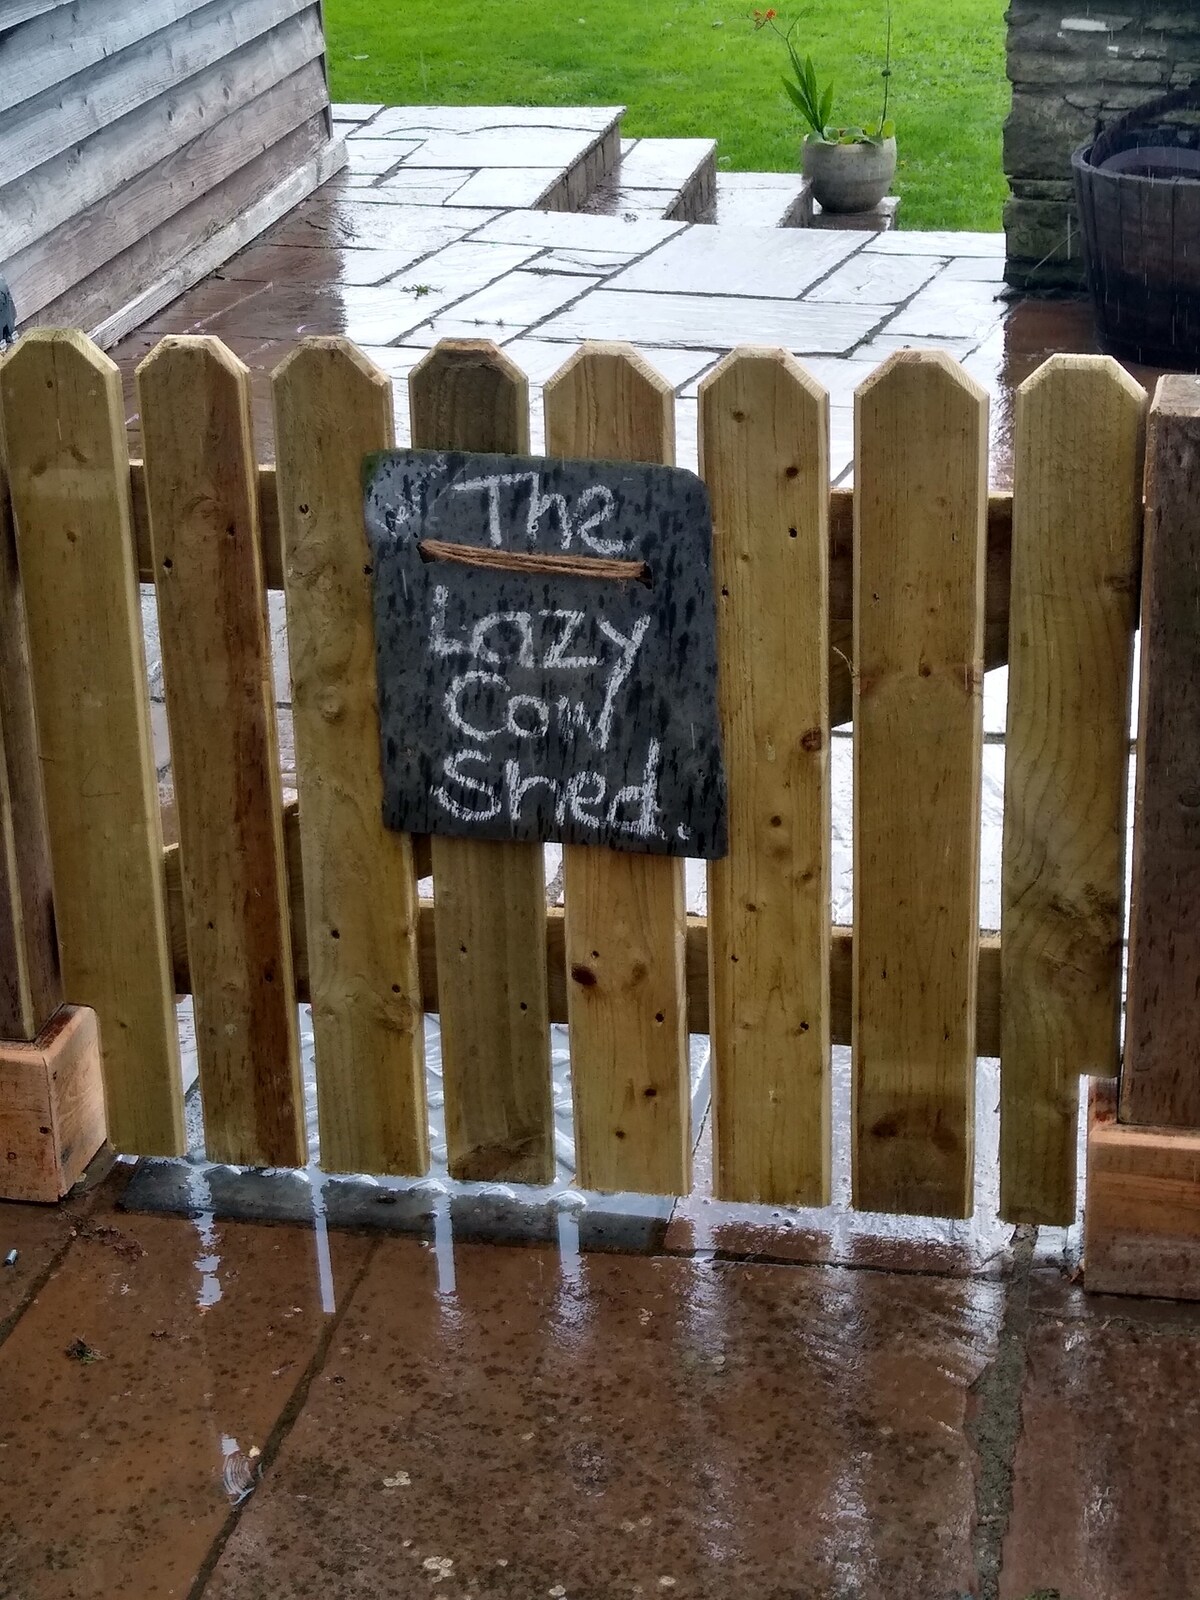 The Lazy Cow Shed